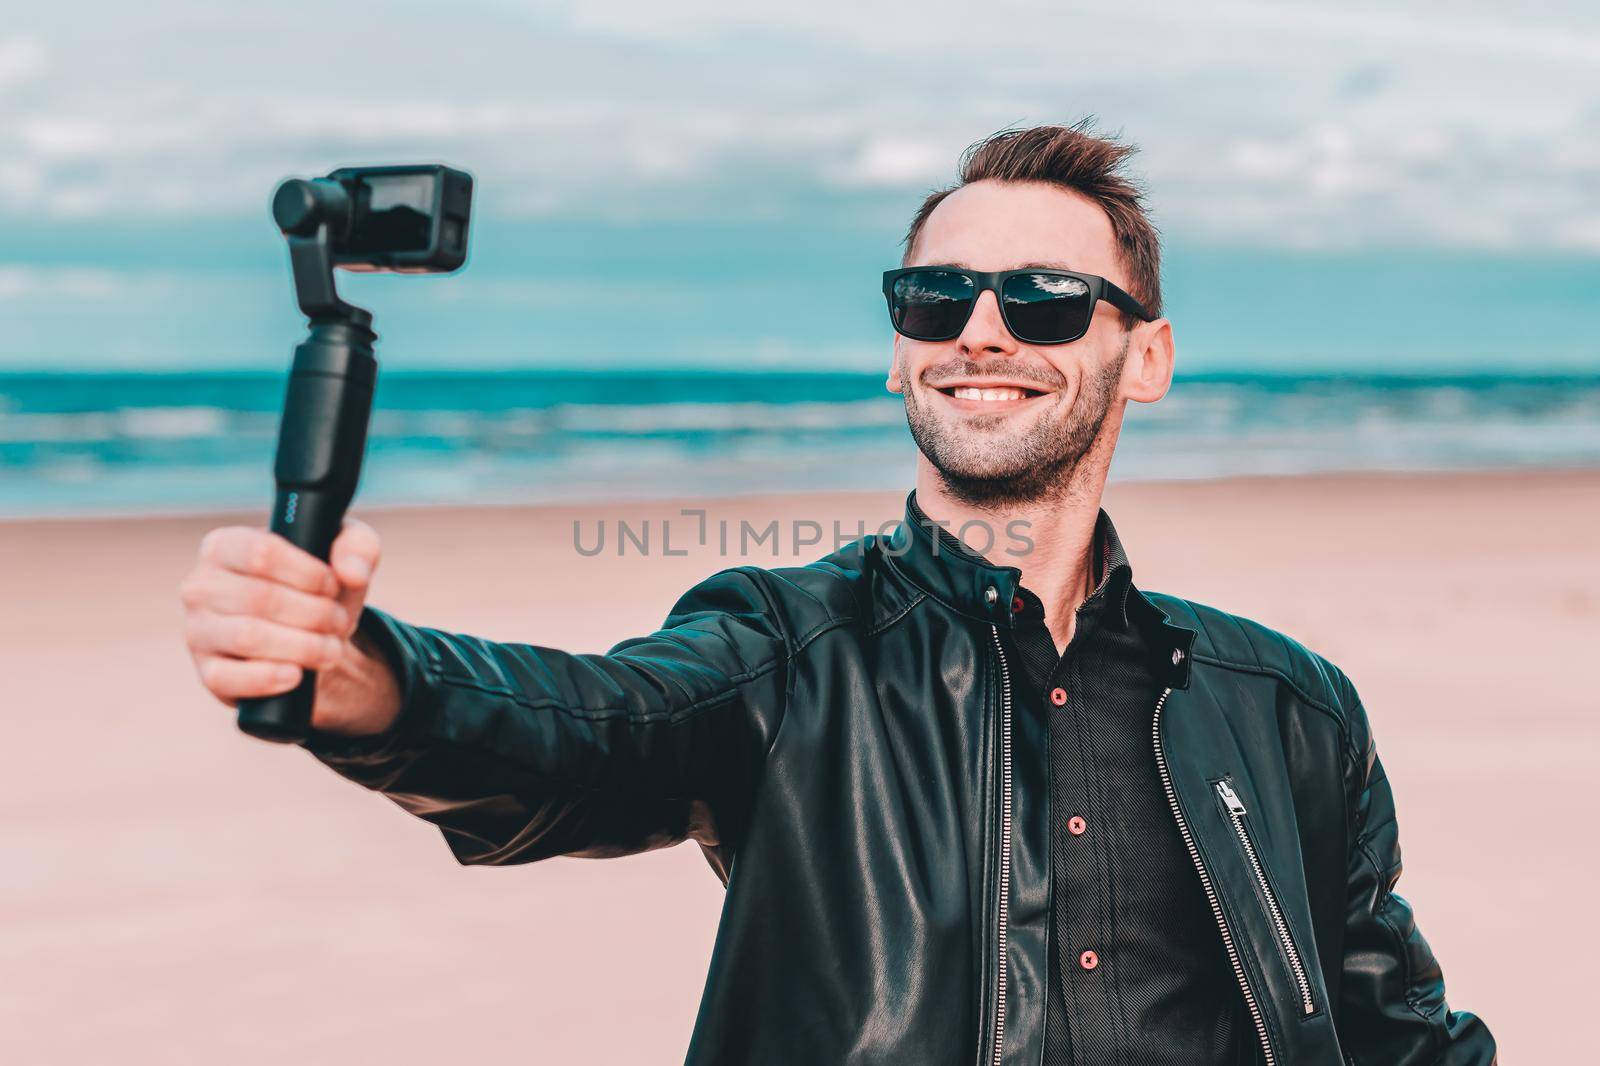 Portrait of Smiling Blogger in Sunglasses Making Selfie or Streaming Video at the Beach Using Action Camera with Gimbal Camera Stabilizer. Man in Black Clothes Making Photos